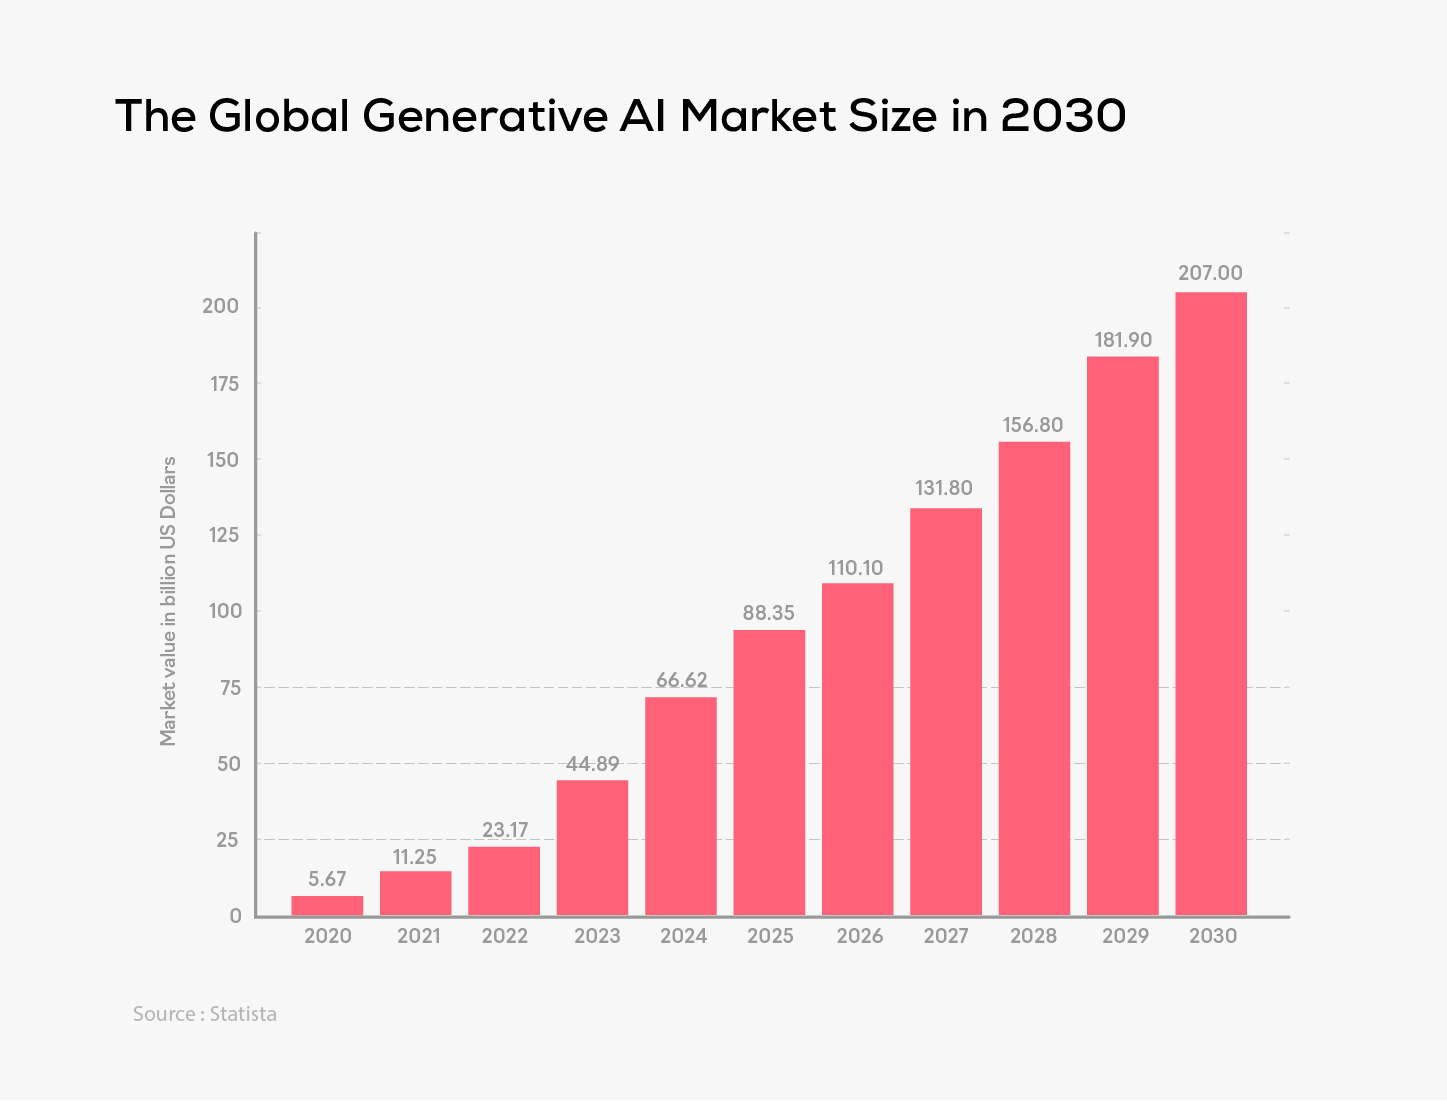 The Global Generative AI Market Size in 2030